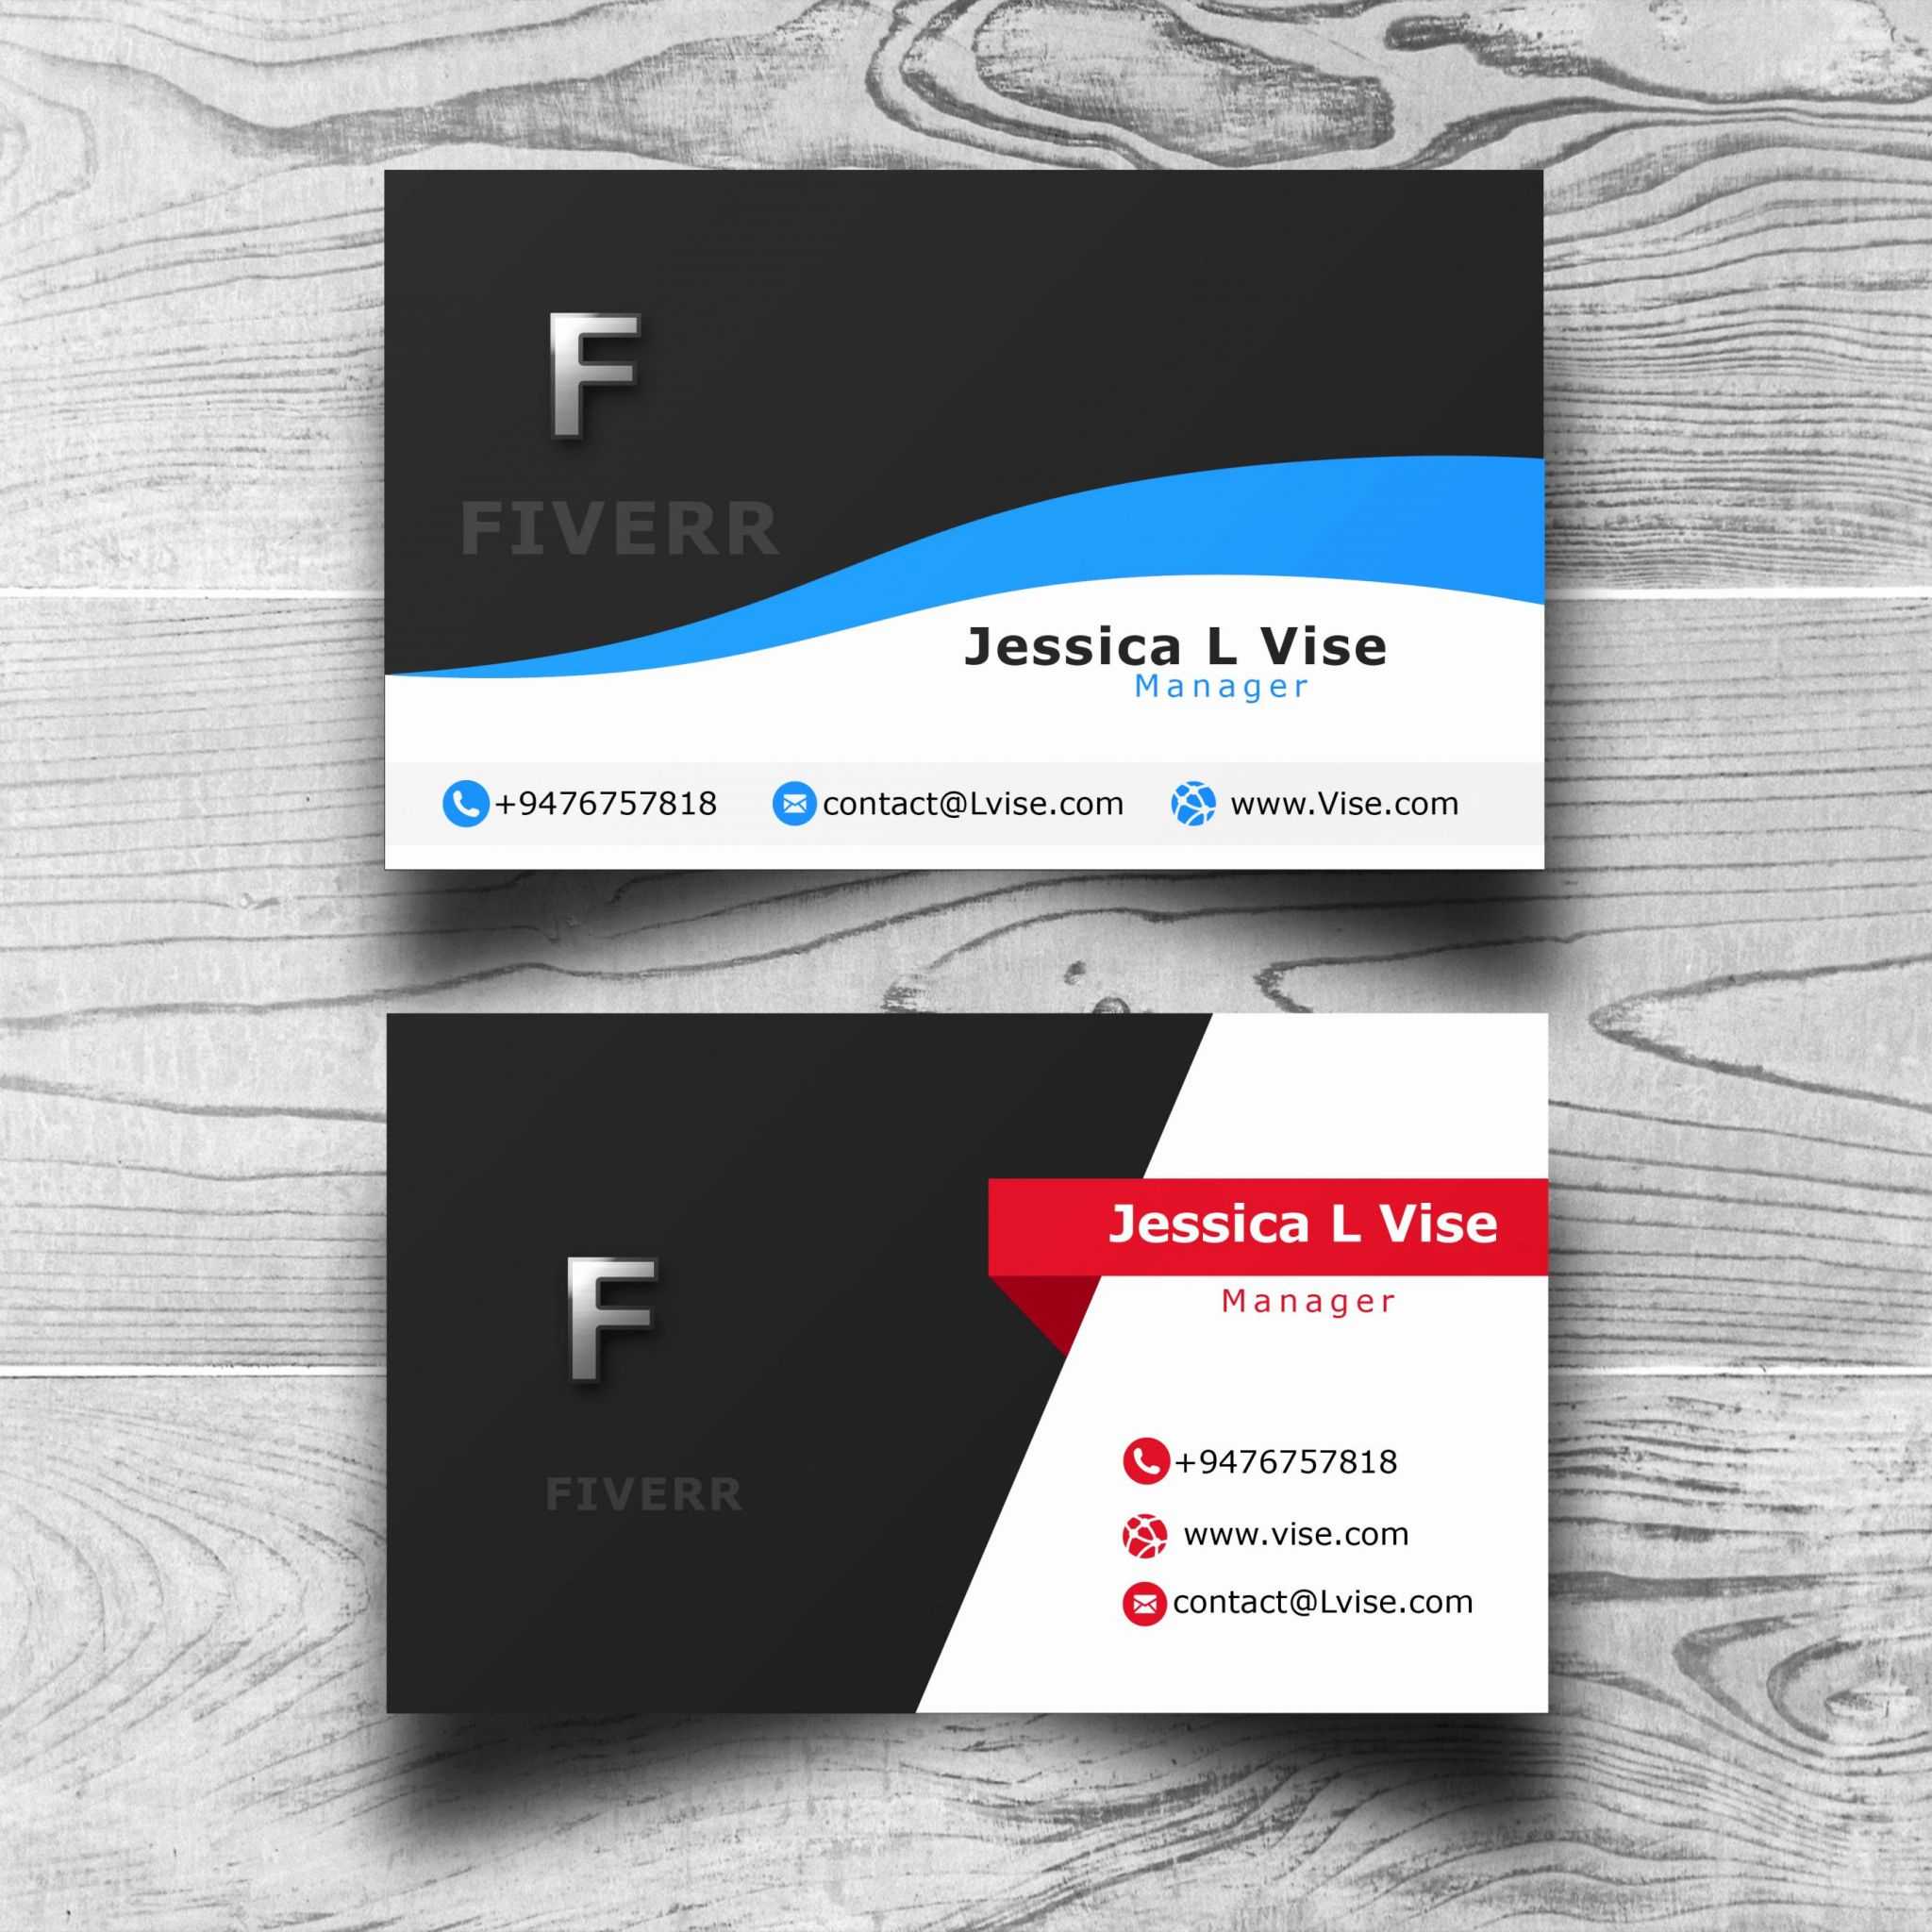 Double Sided Business Card Template Illustrator | Lera Mera With Regard To Double Sided Business Card Template Illustrator